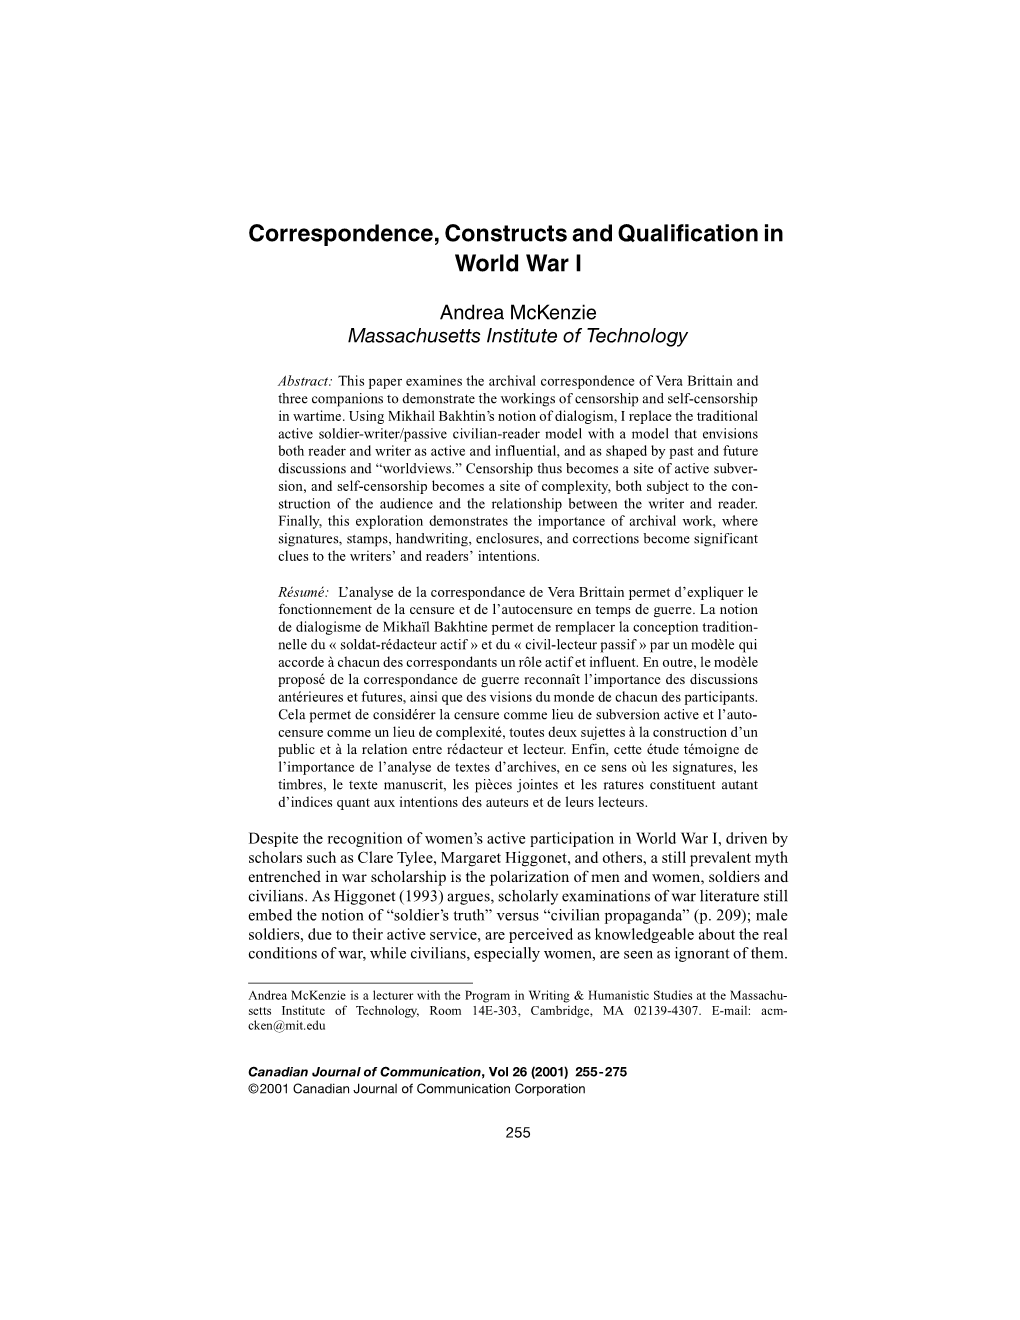 Correspondence, Constructs and Qualification in World War I